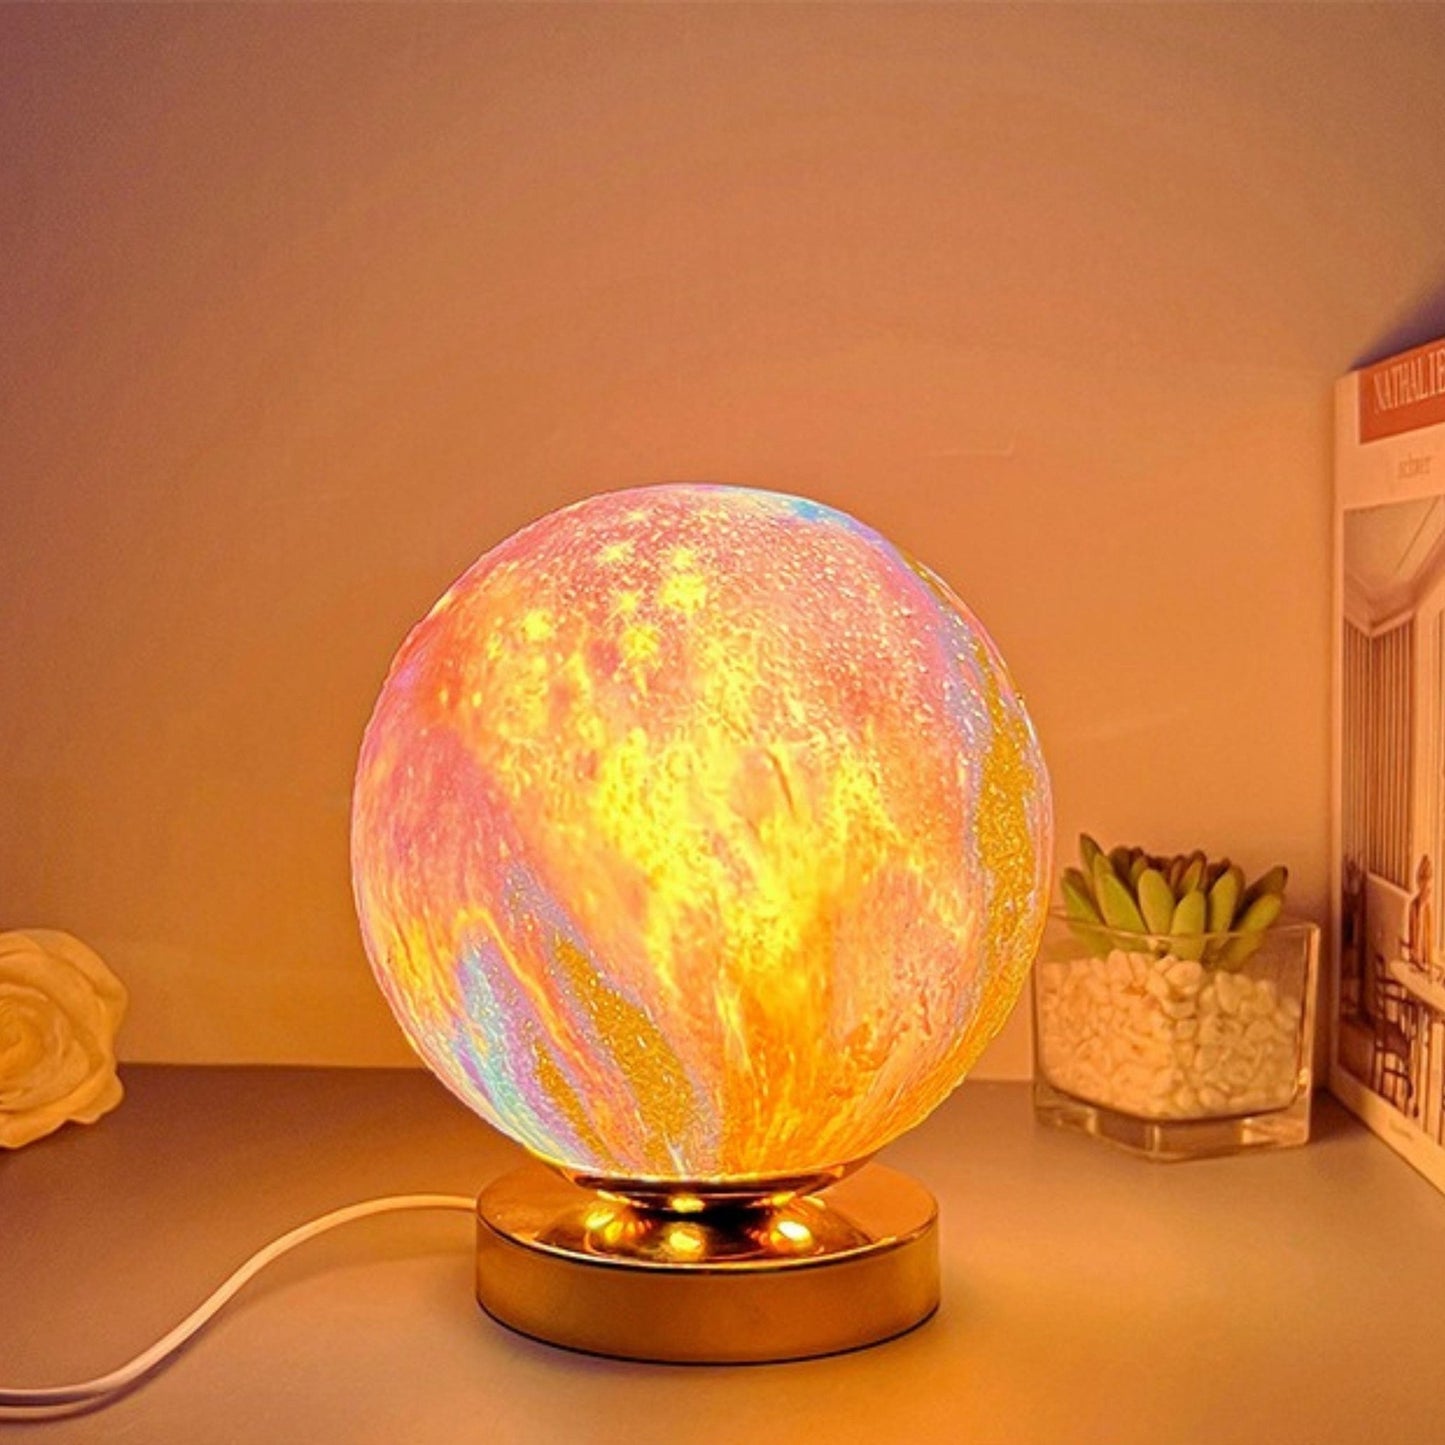 Molten Lava Planet Lamp - Space Mesmerise - Space Gifts | Lamps | Statues | Home Decor